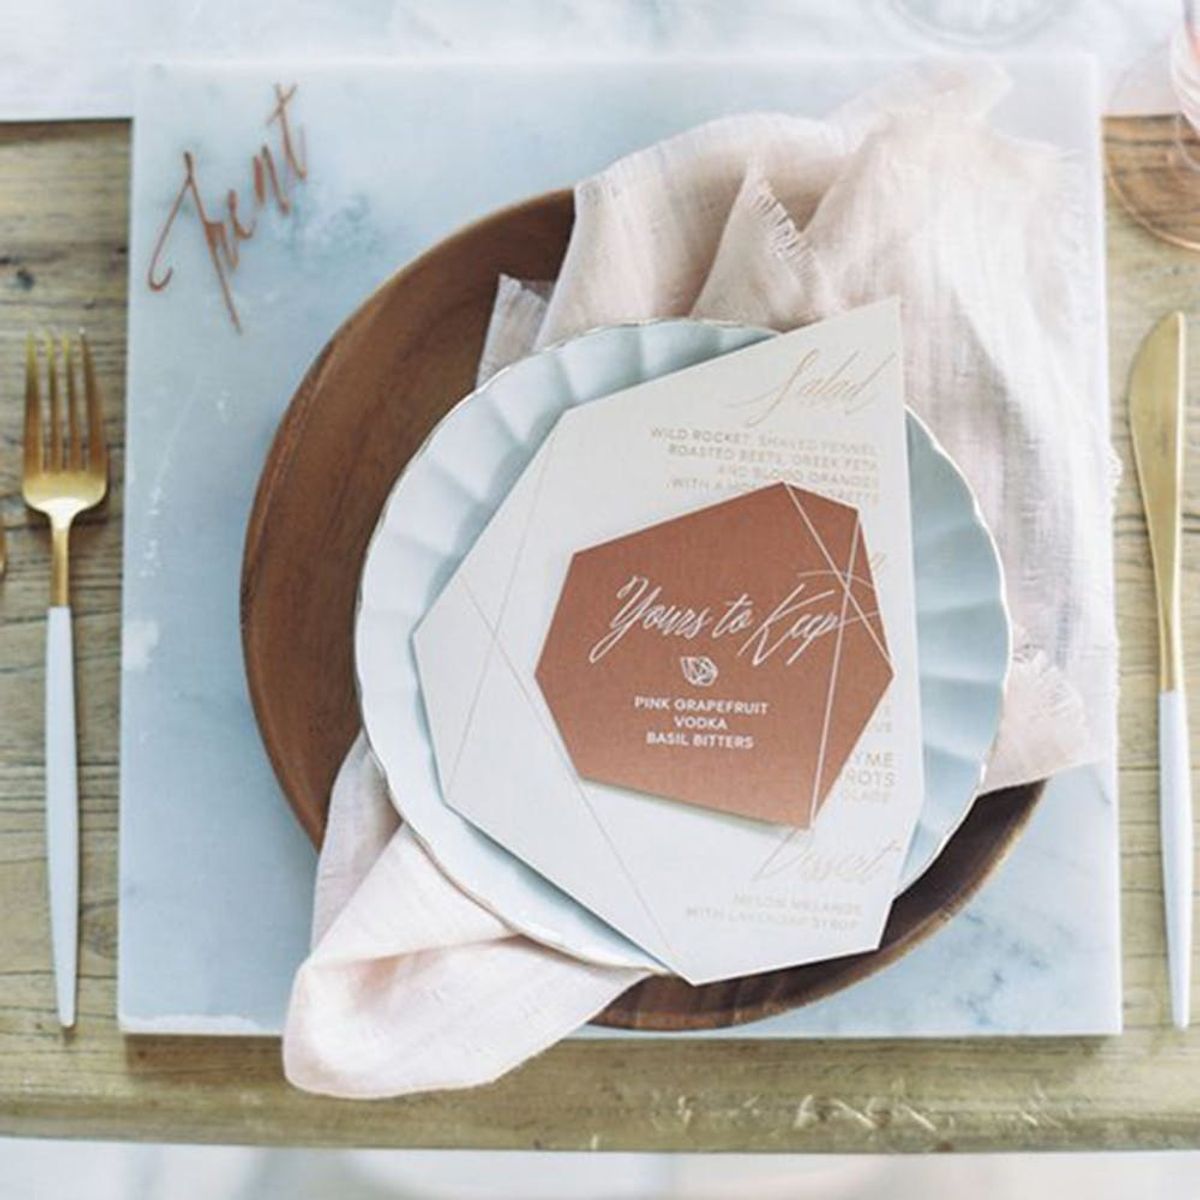 5 Engagement Party Themes That Aren’t Lame